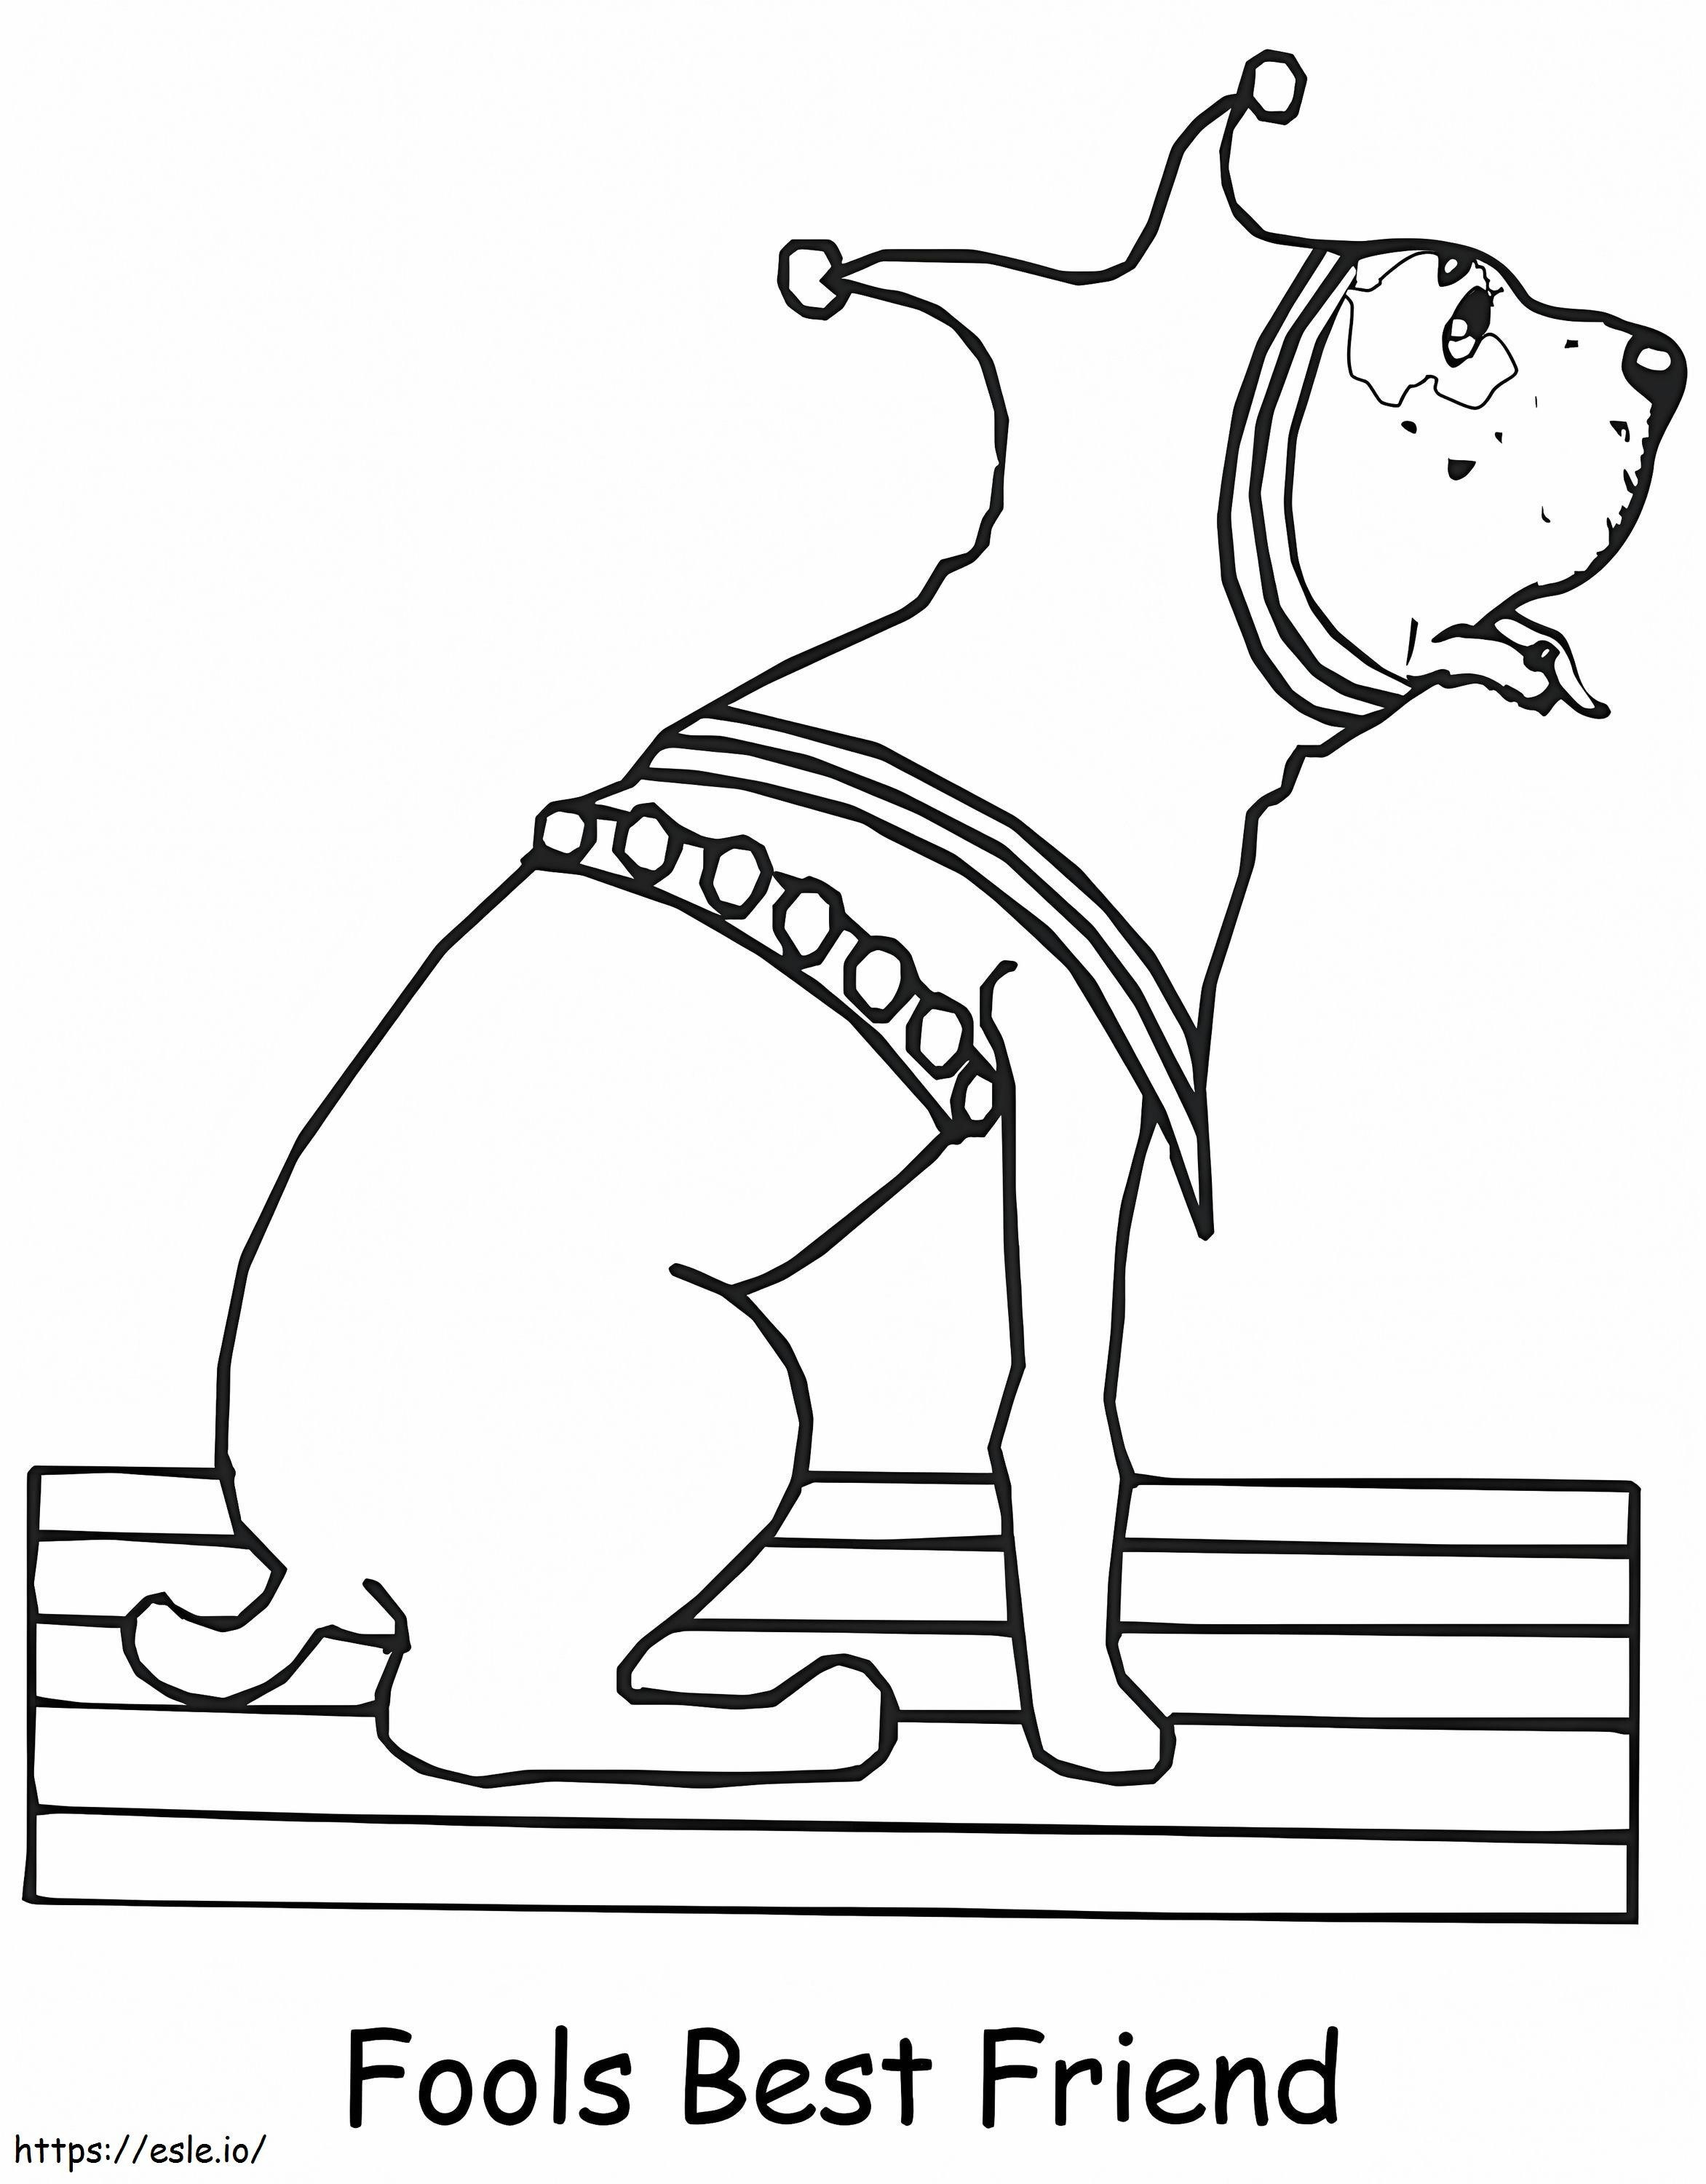 Dog April Fools Day coloring page